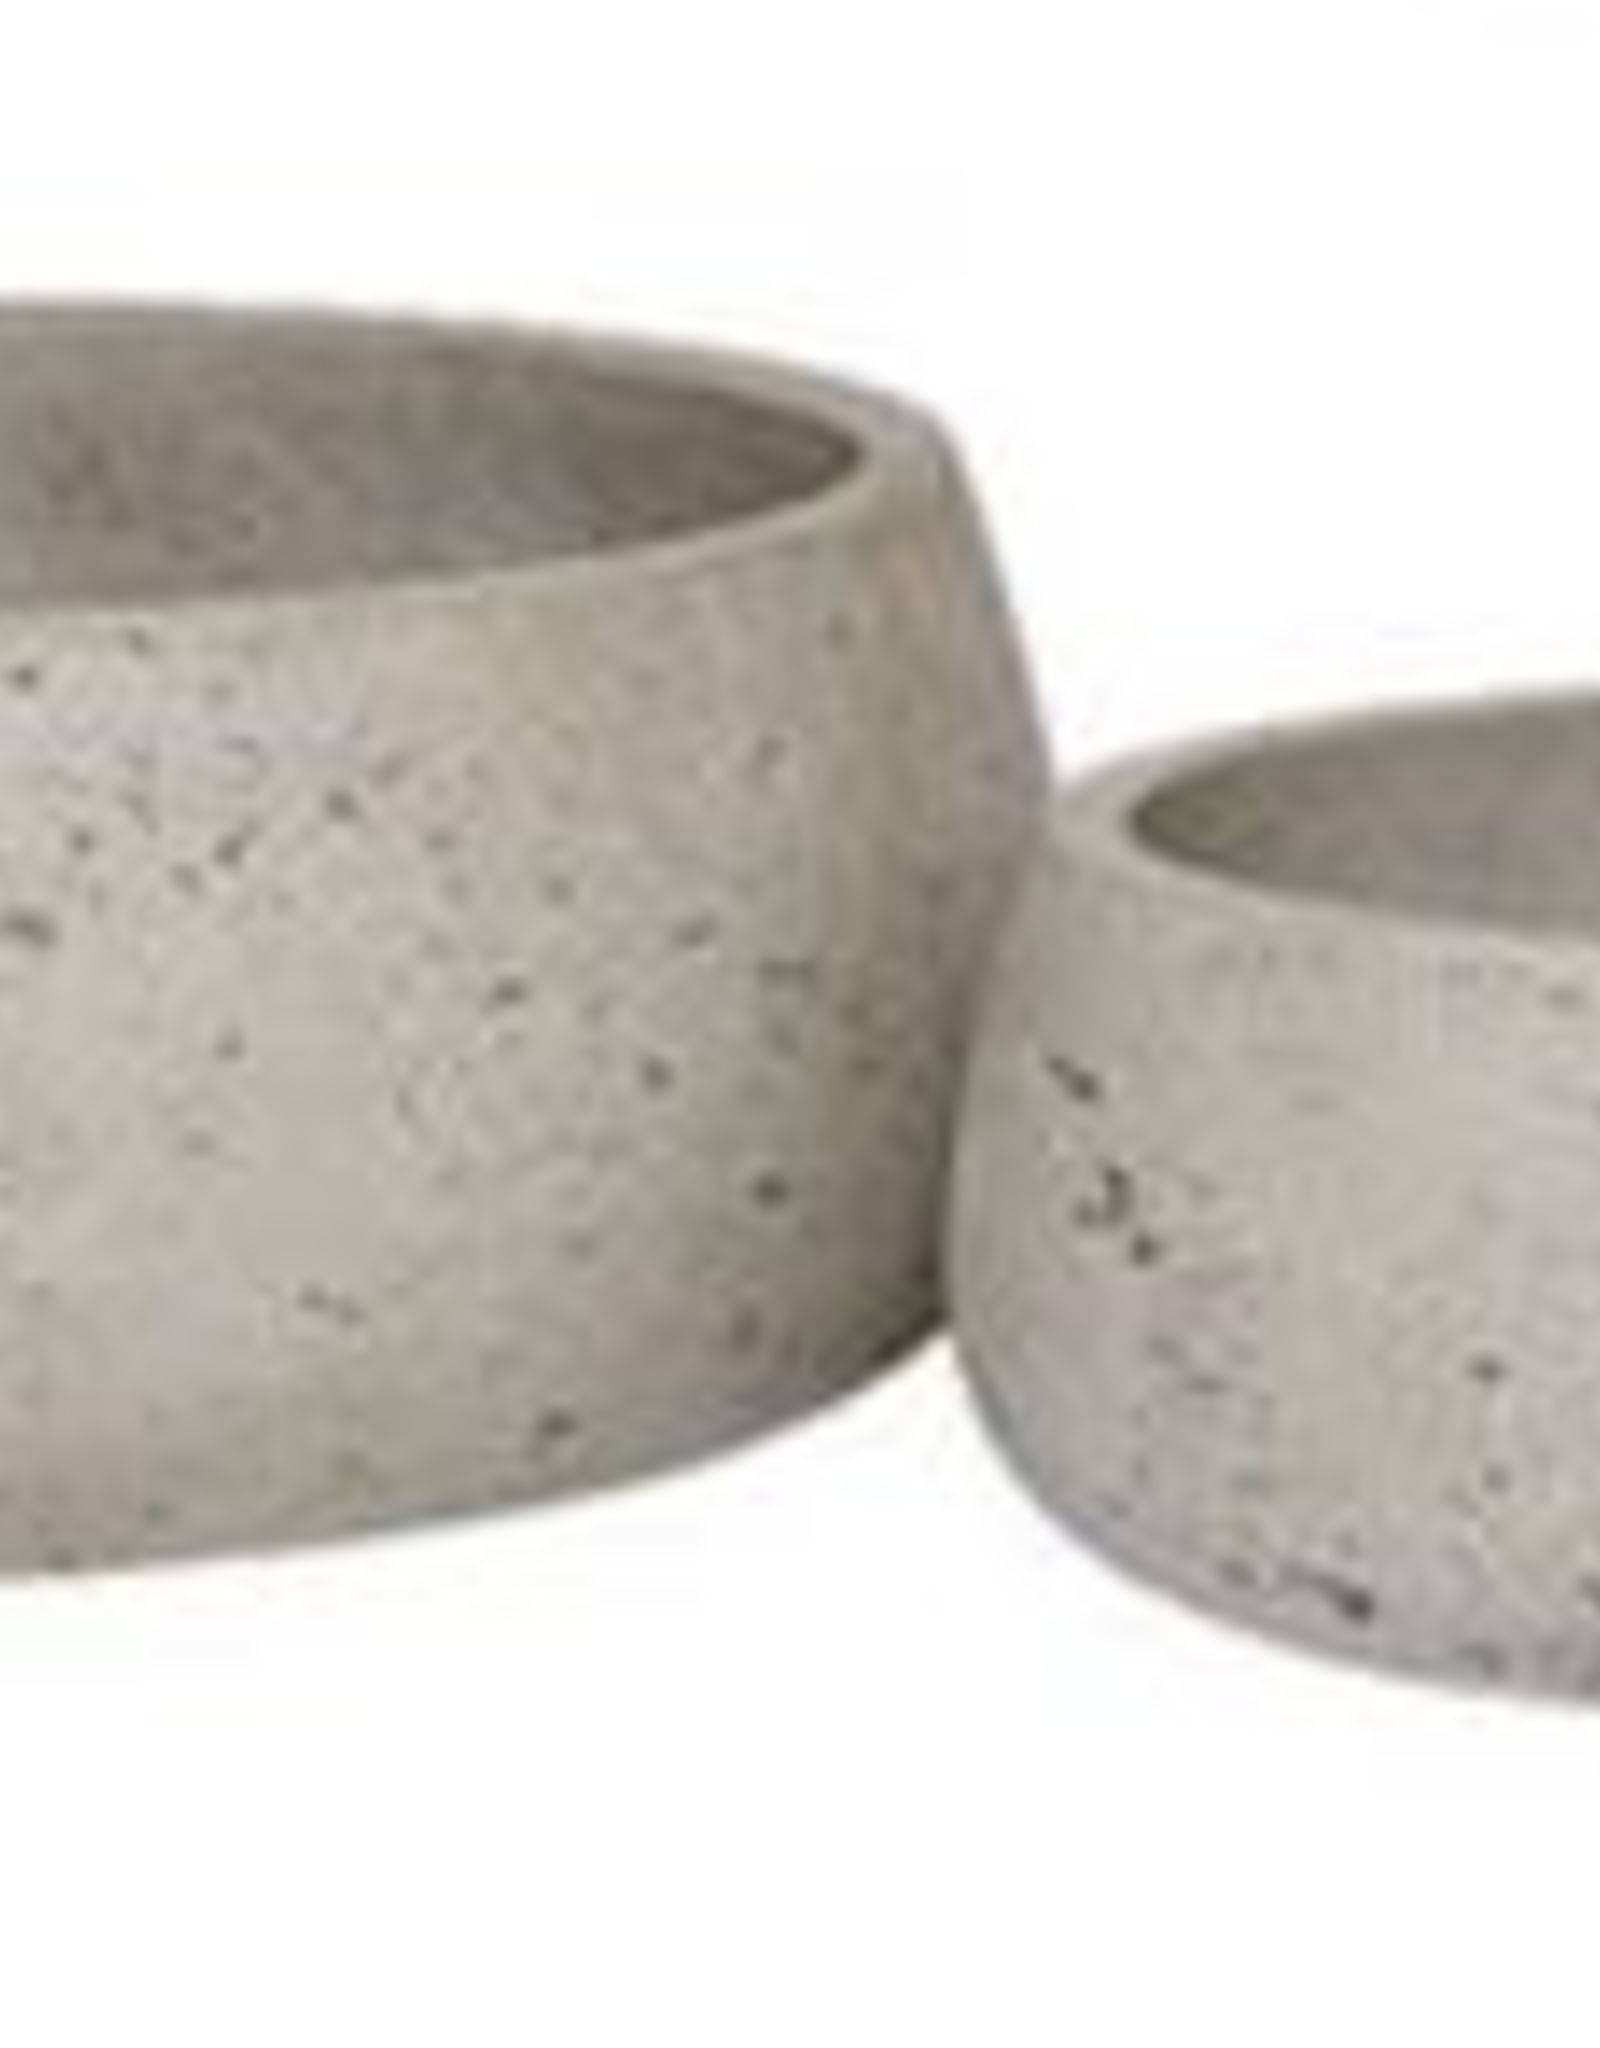 Small Ro-Cement Bowl D9.5" H3.5"